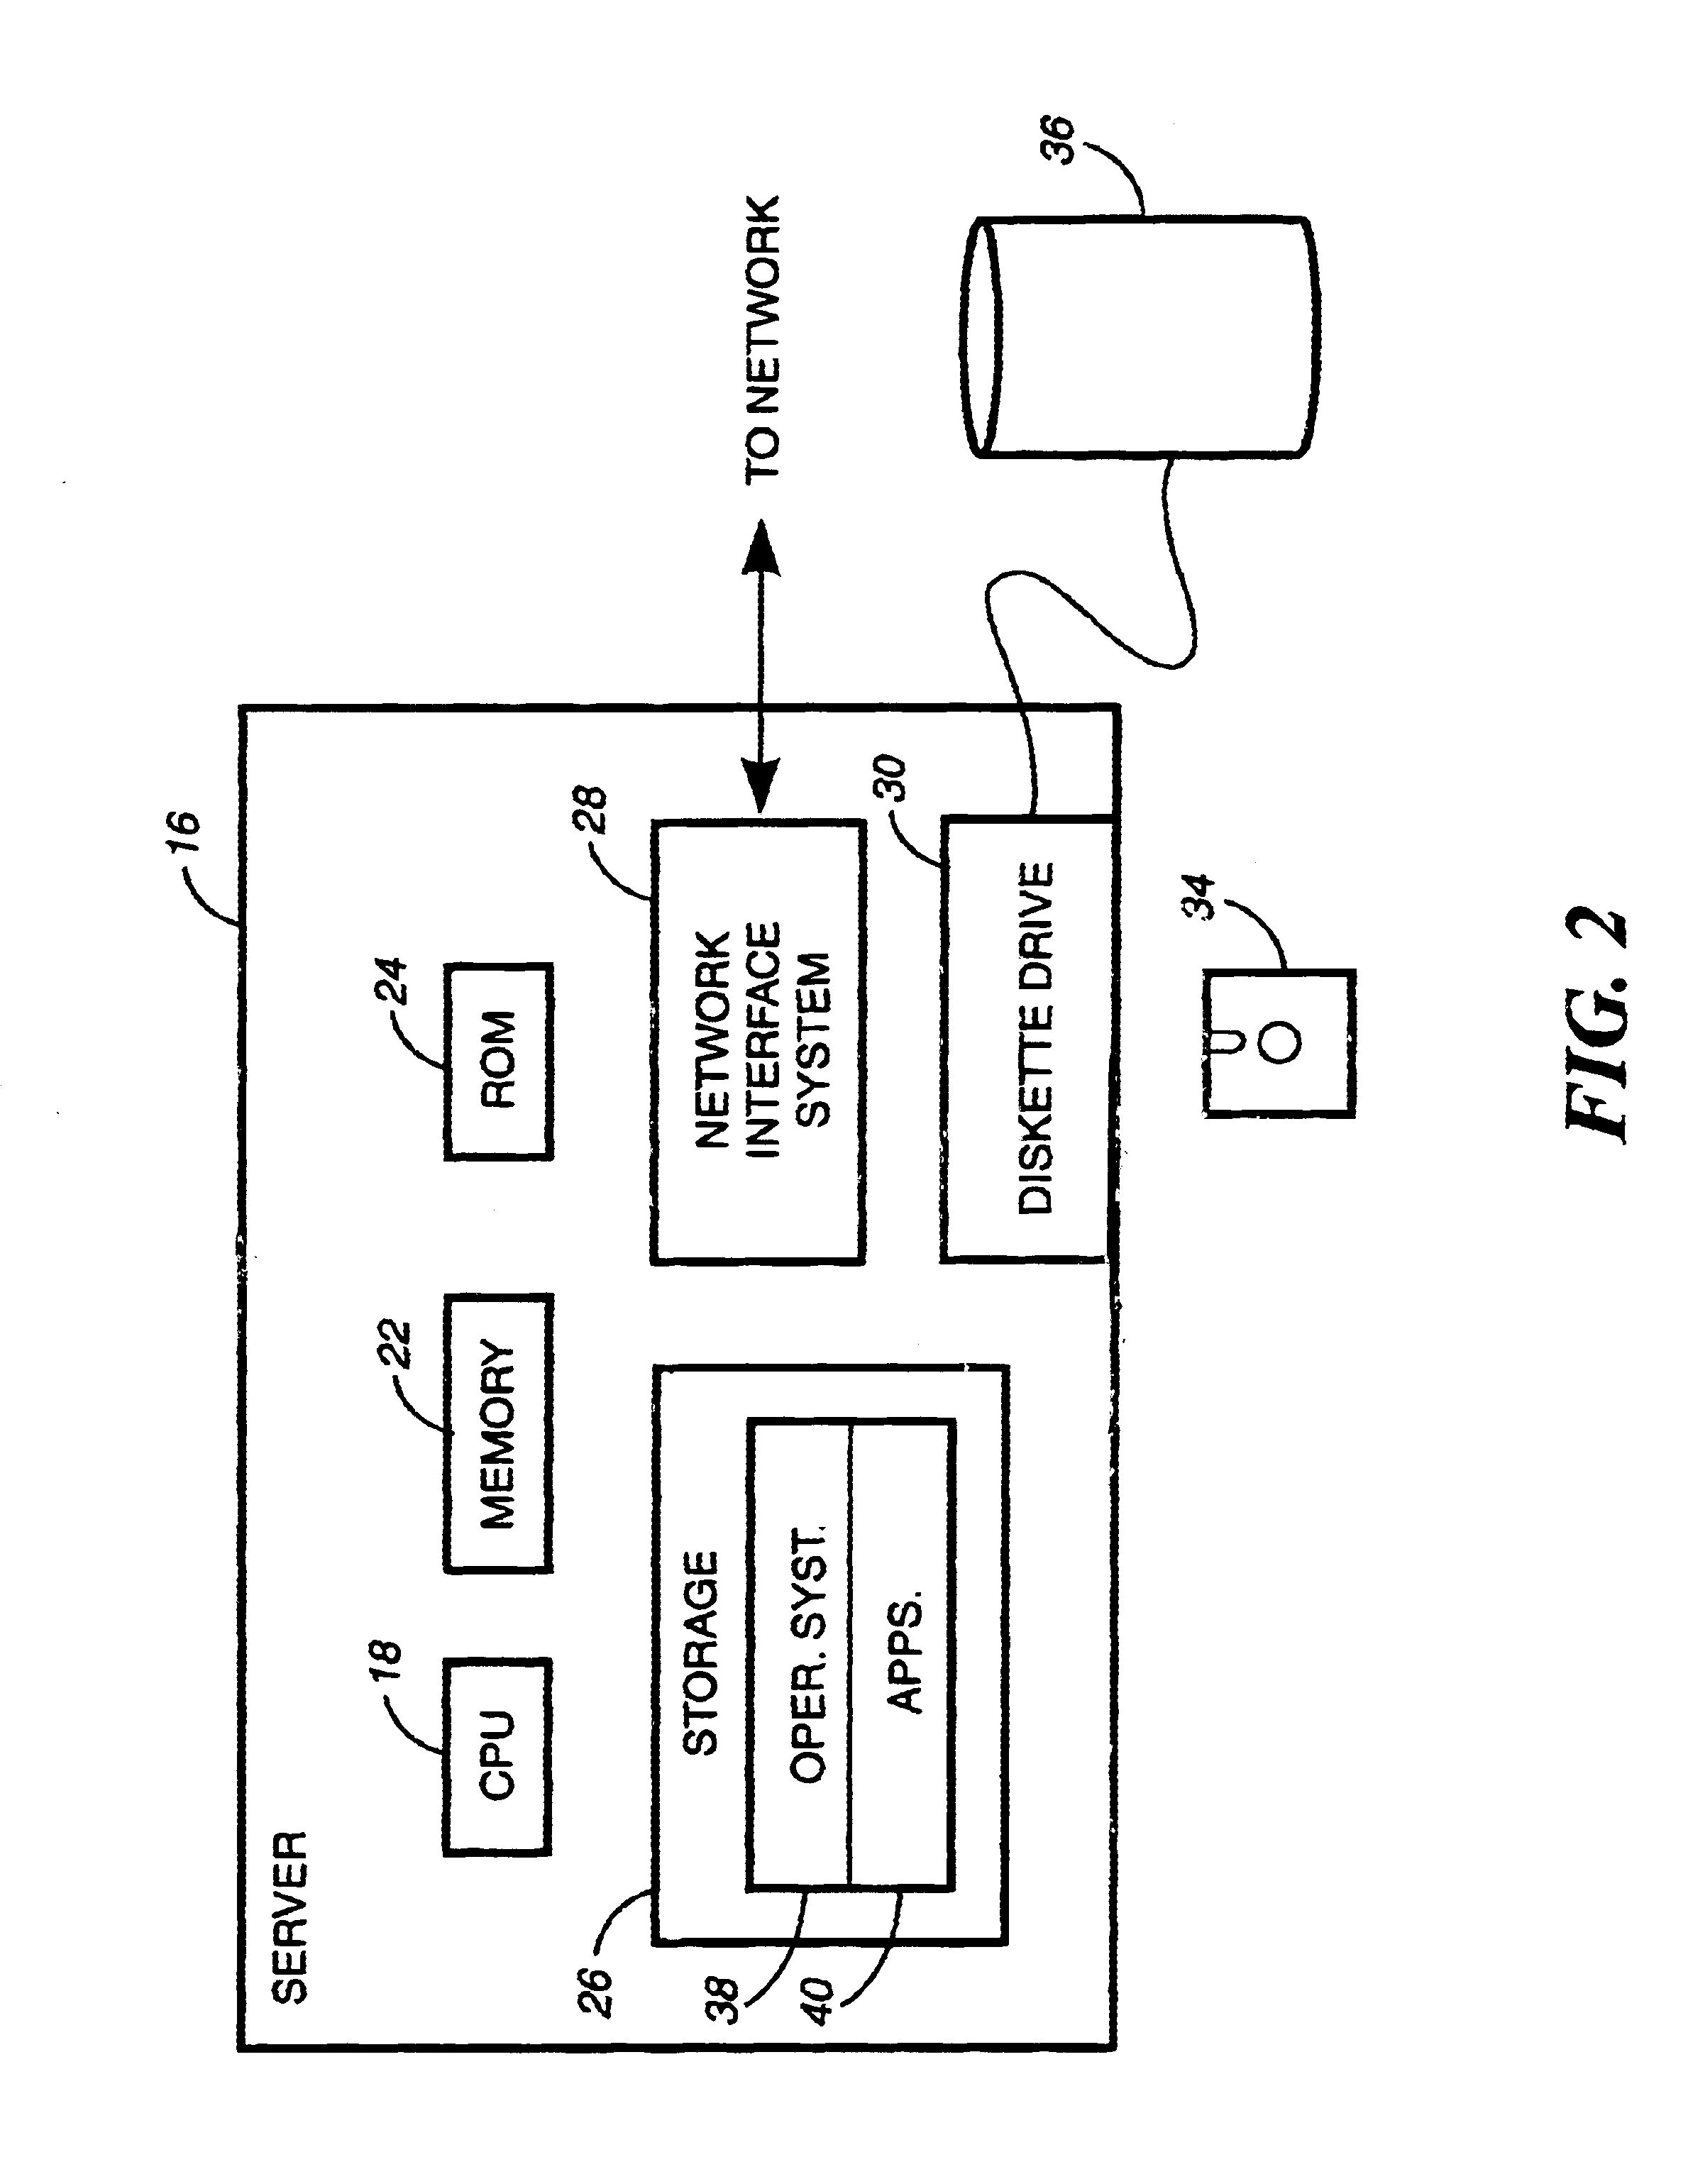 System for multicast communications in packet switched networks